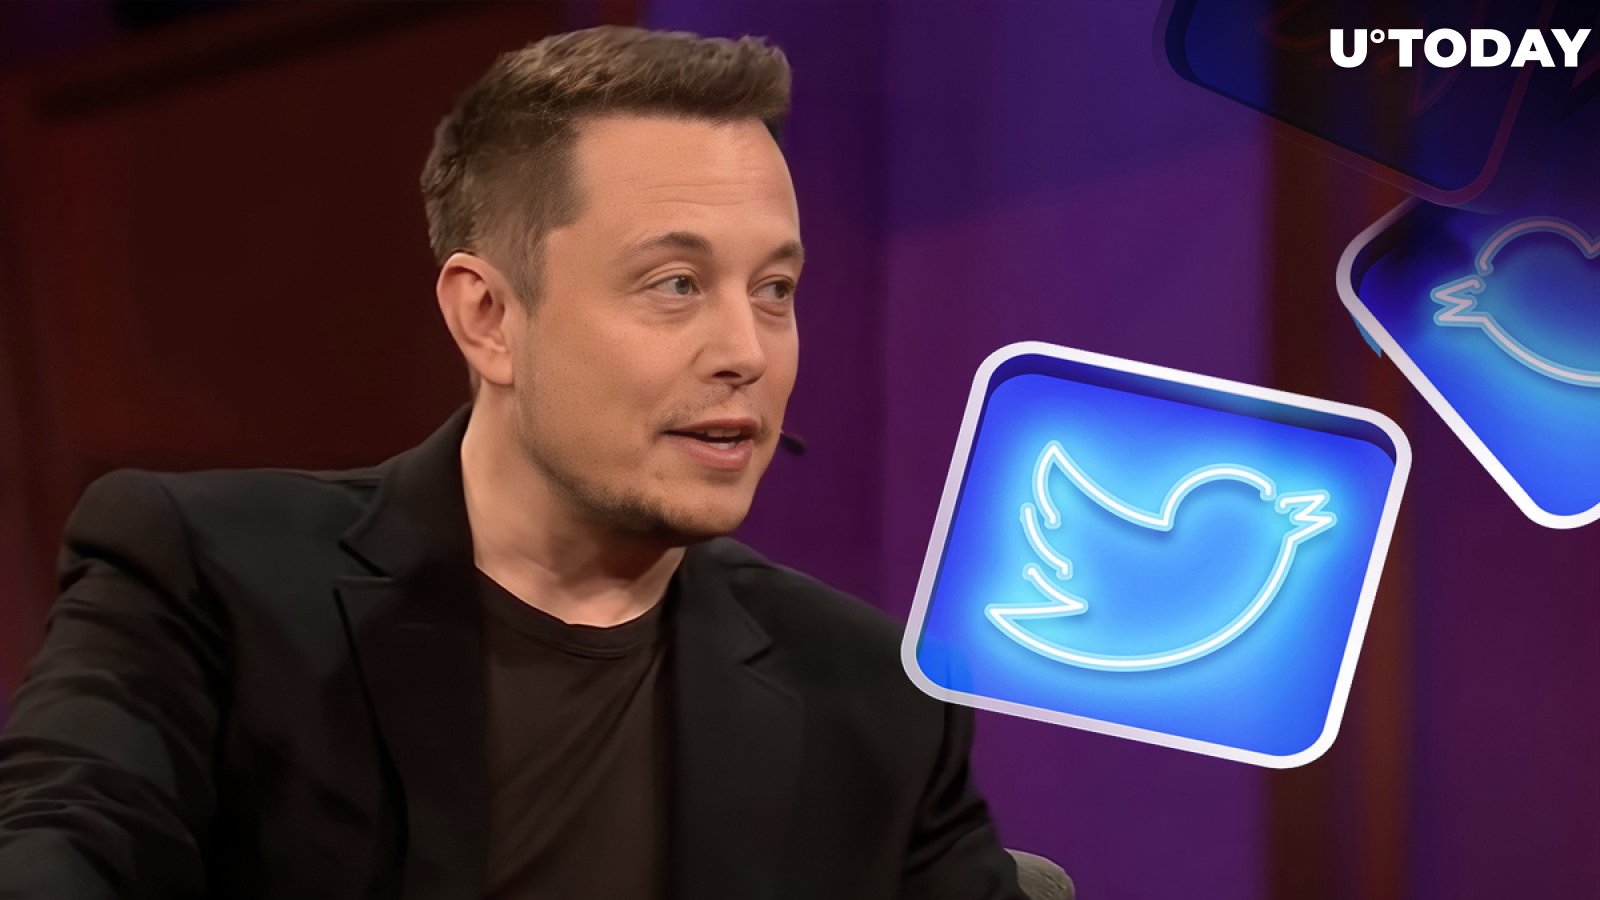 Elon Musk's New Tweet Finds Response From XRP Army, Here's What He Posted